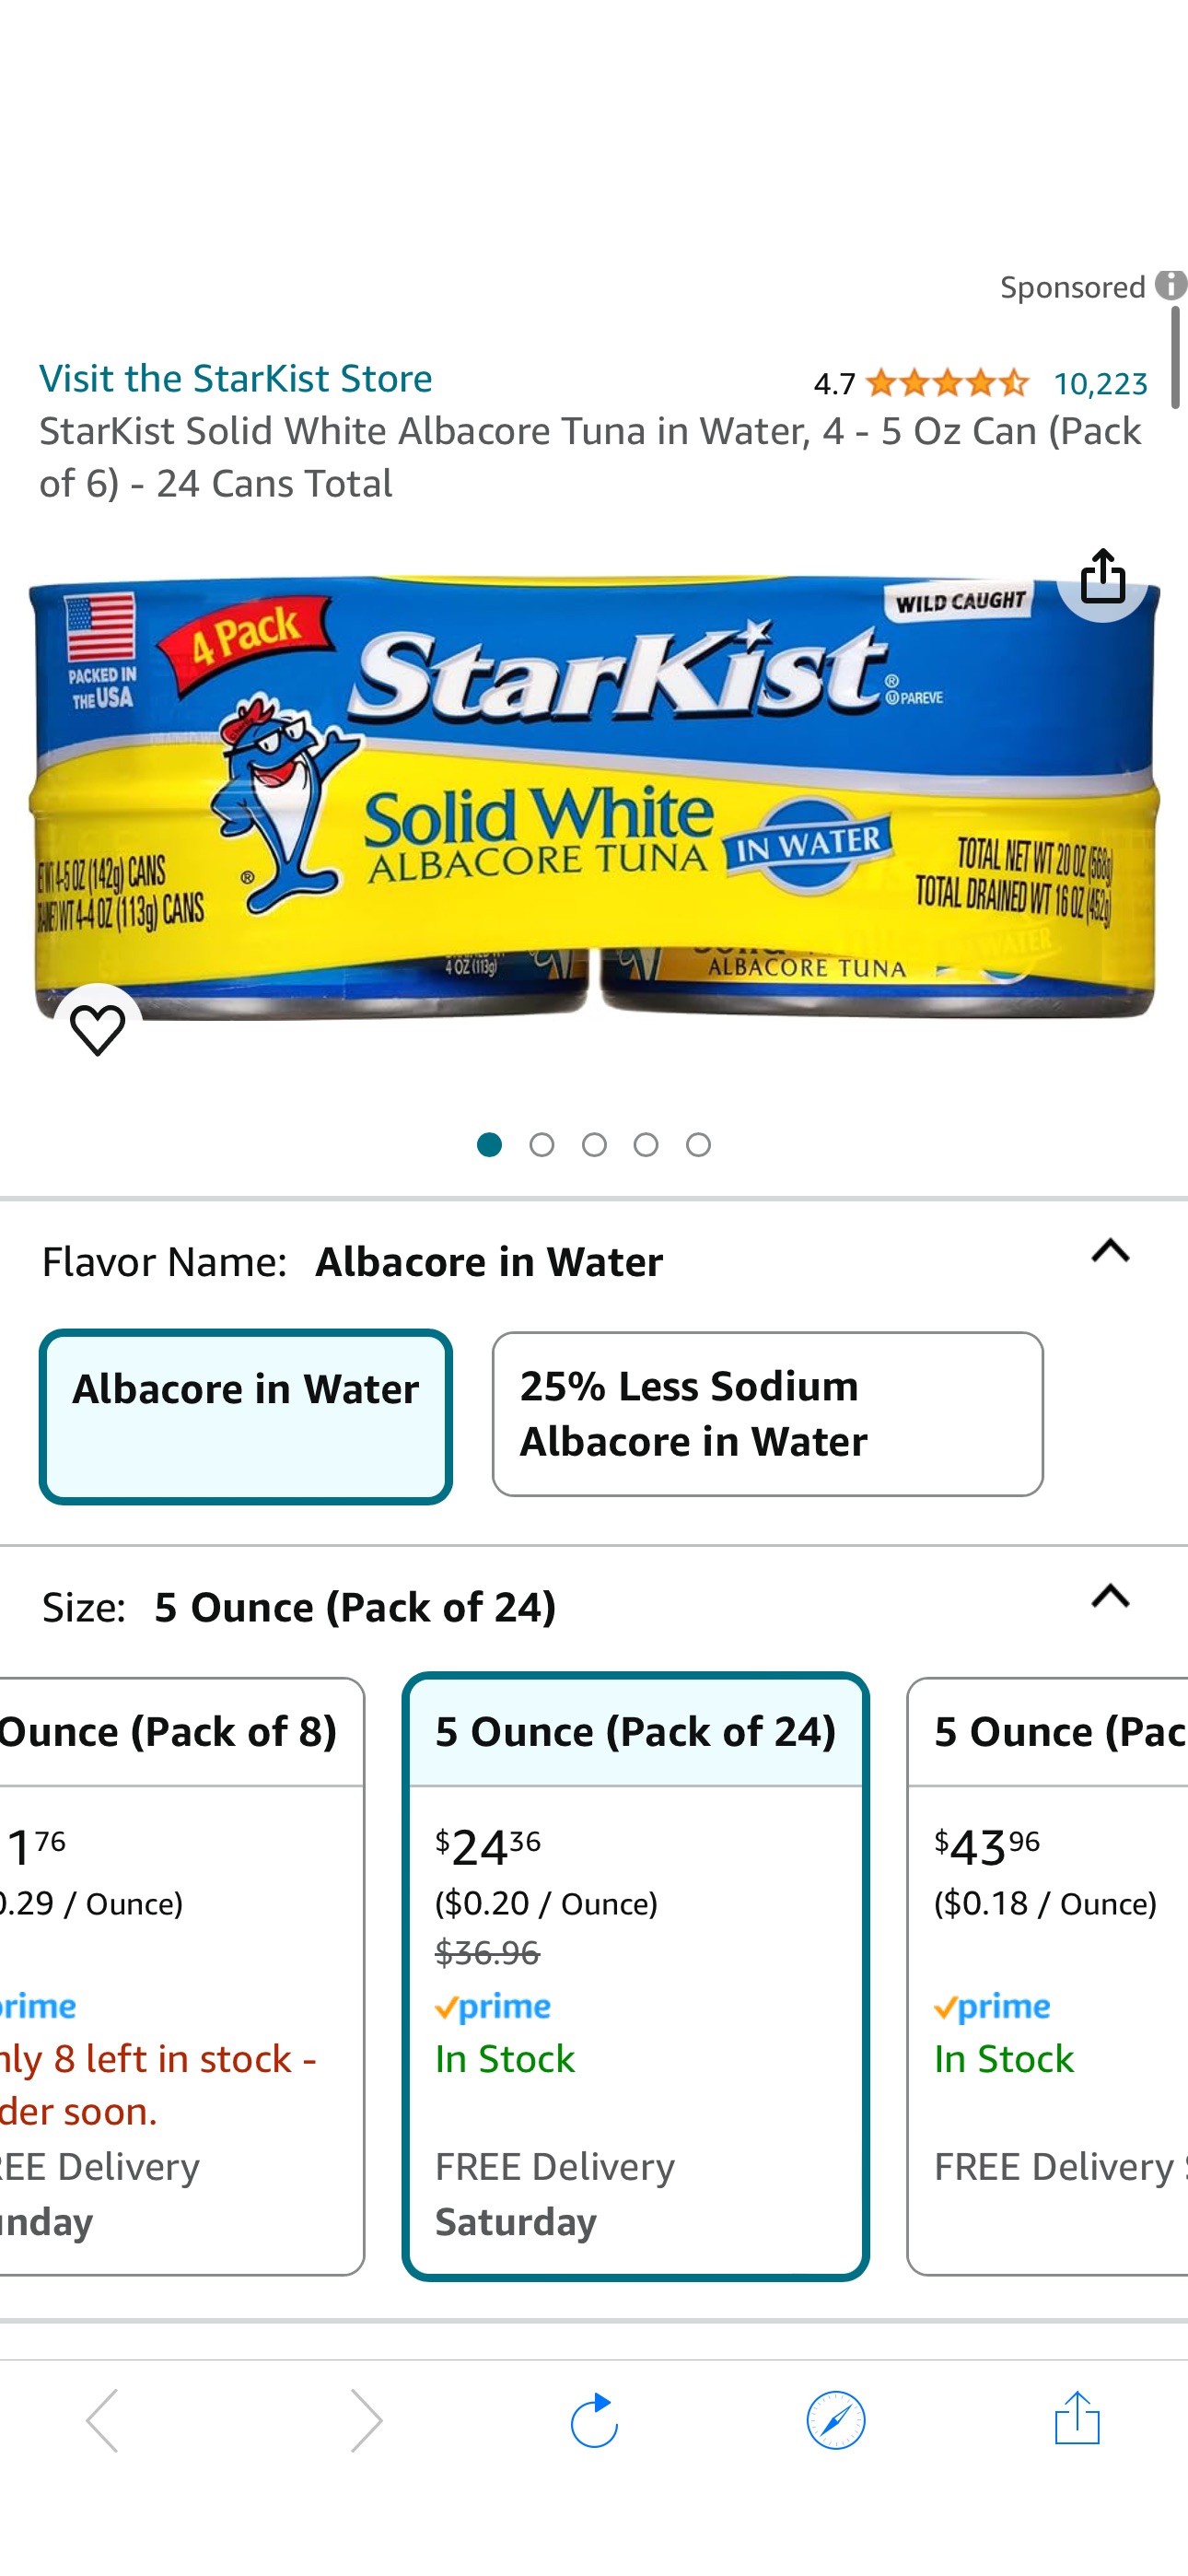 Amazon.com : StarKist Solid White Albacore Tuna in Water, 4 - 5 Oz Can (Pack of 6) - 24 Cans Total : Grocery & Gourmet Food